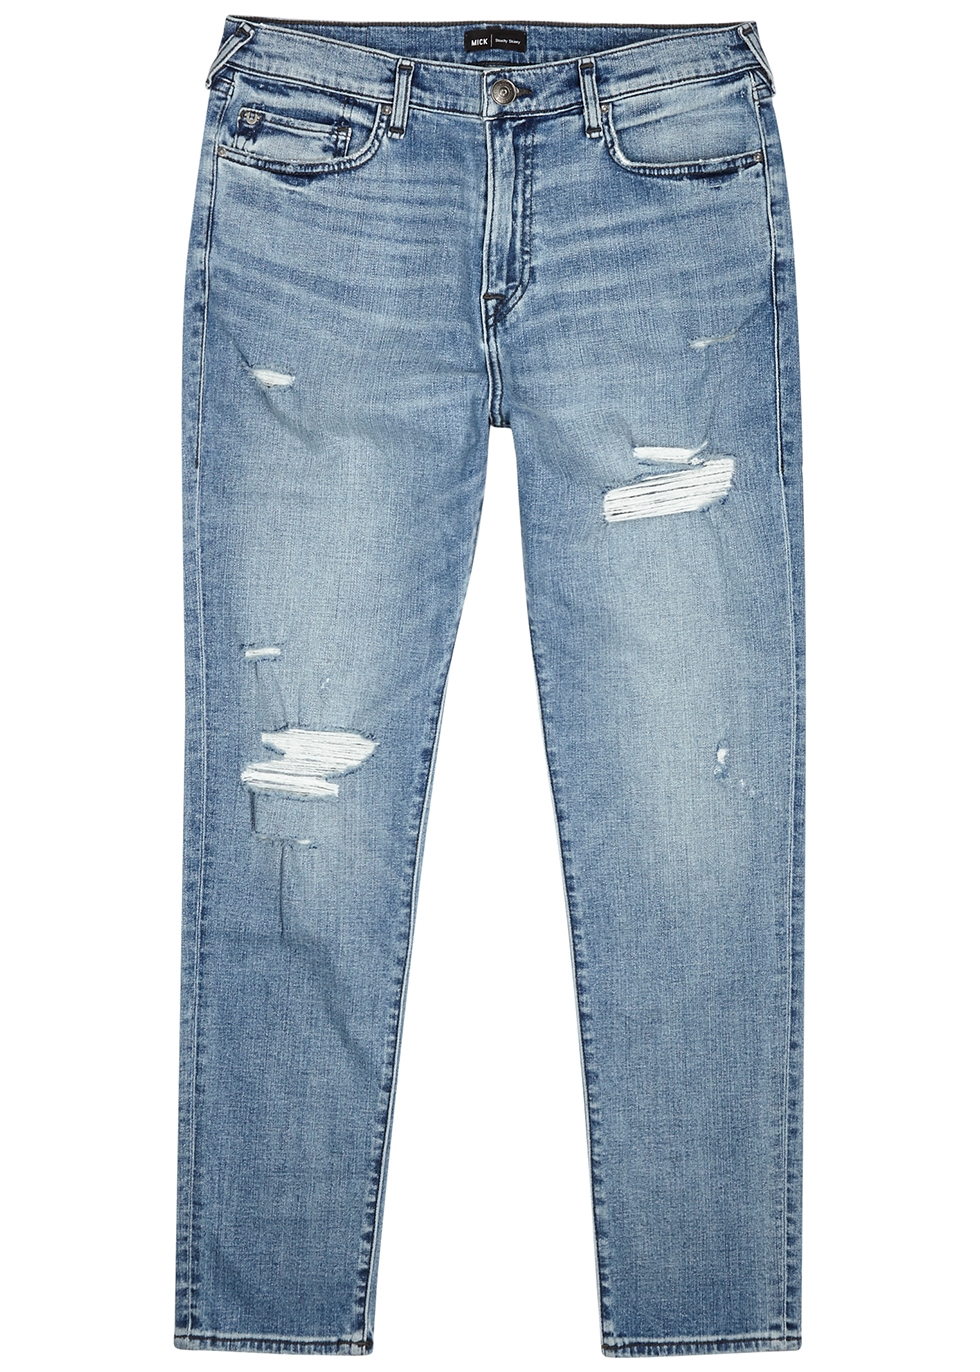 true religion white ripped jeans